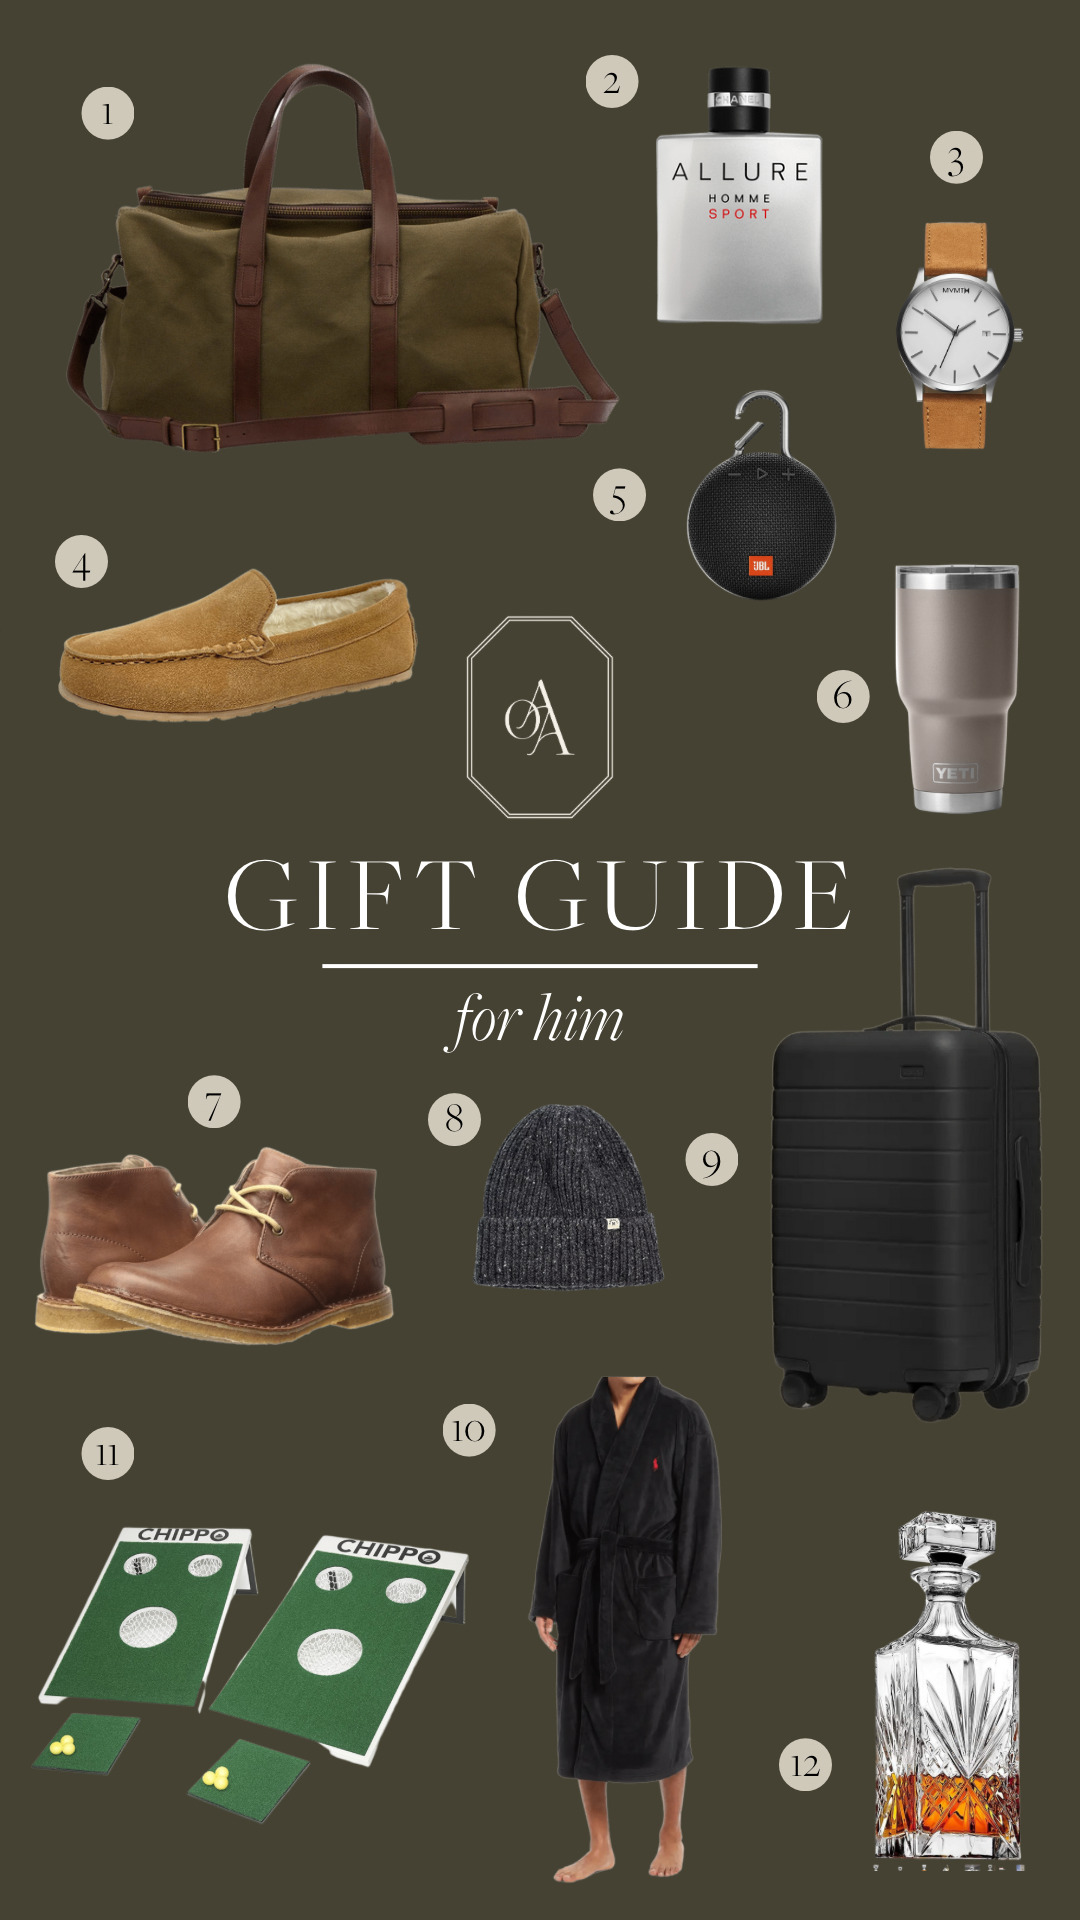 12 gift ideas for husbands